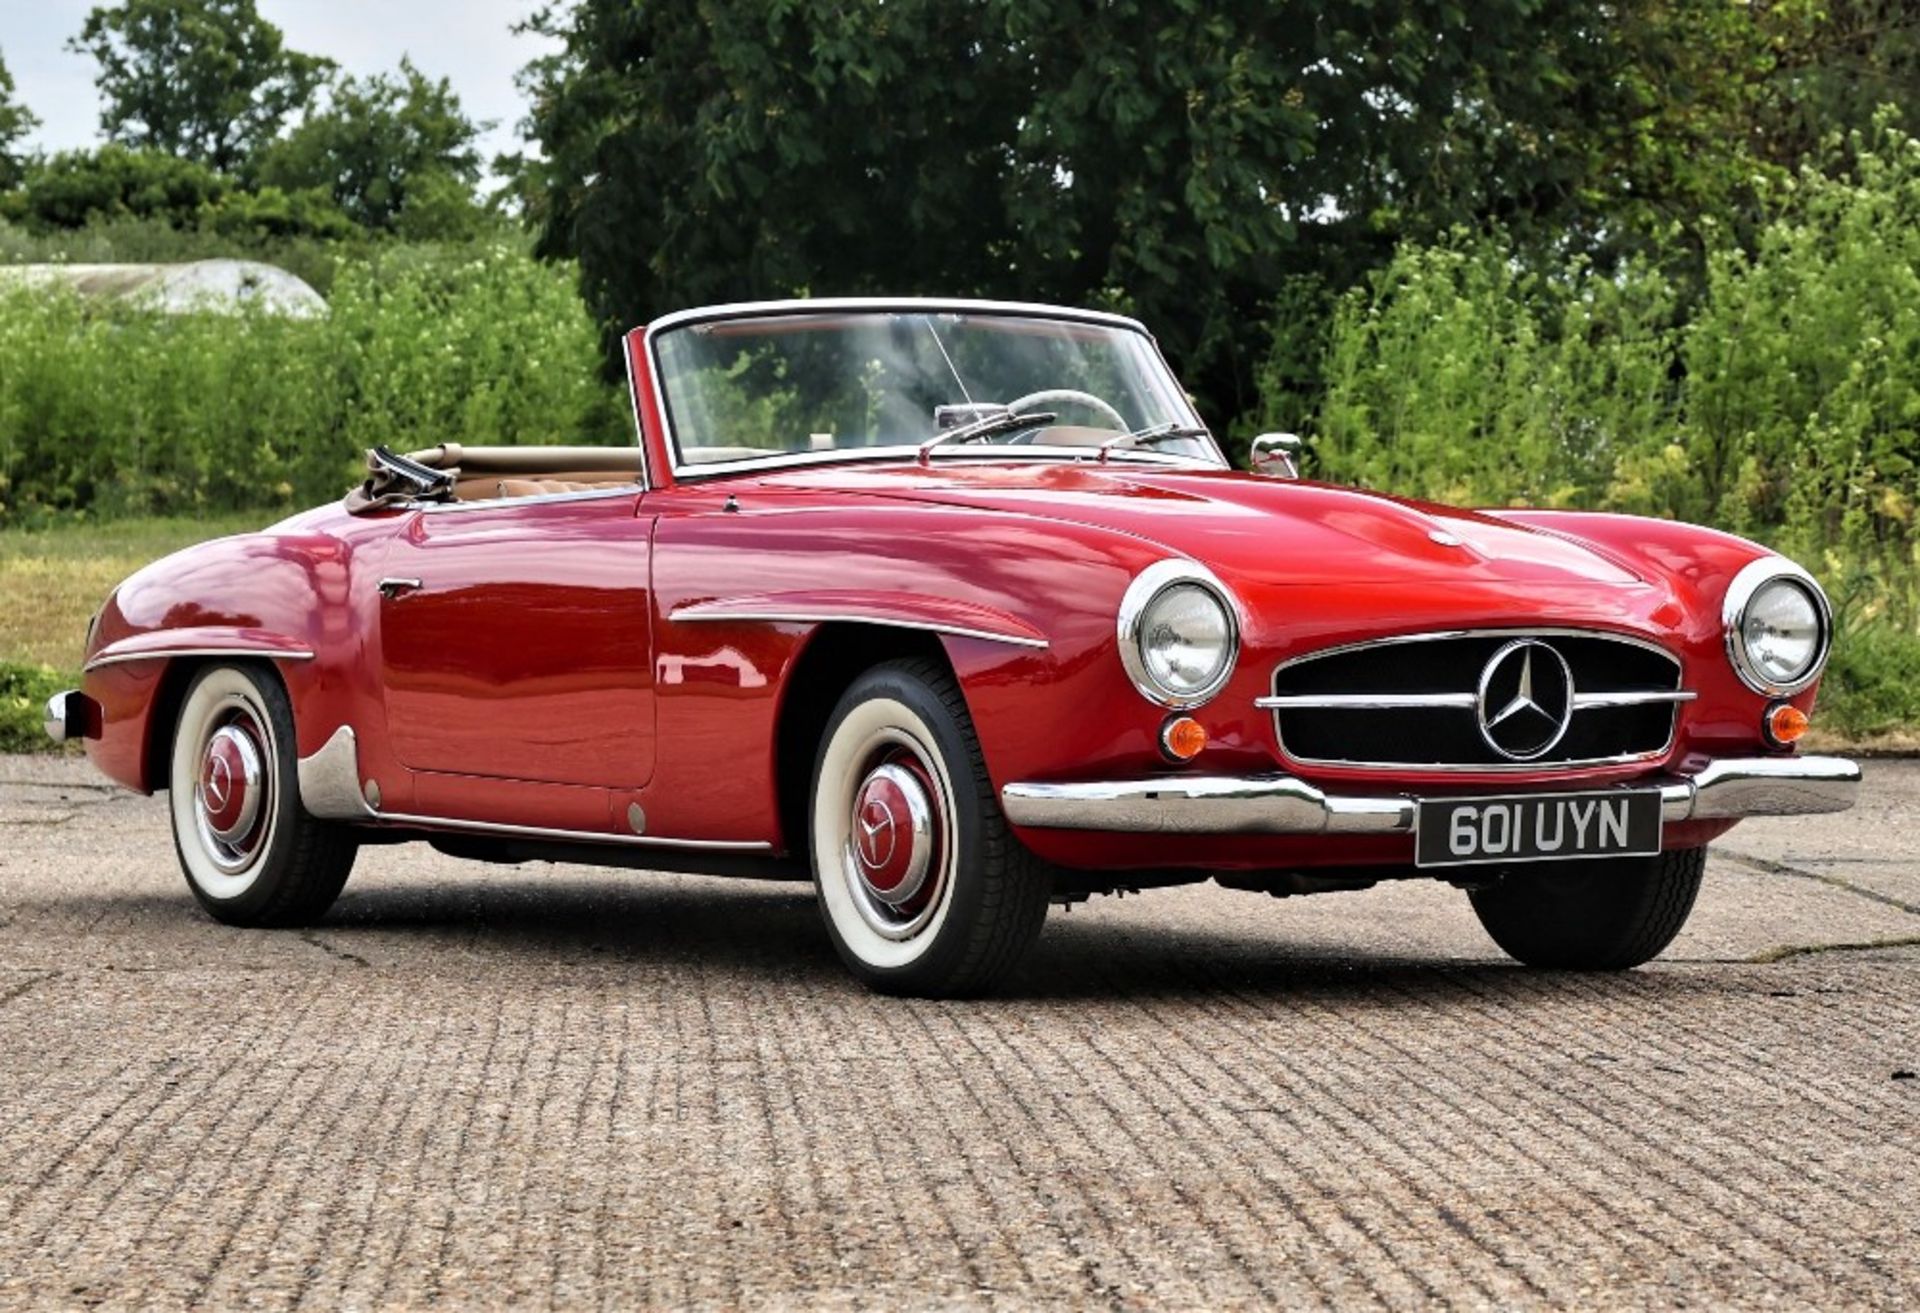 1958 MERCEDES-BENZ 190SL Registration Number: 601 UYN Chassis Number: 121.040.8500635 Recorded